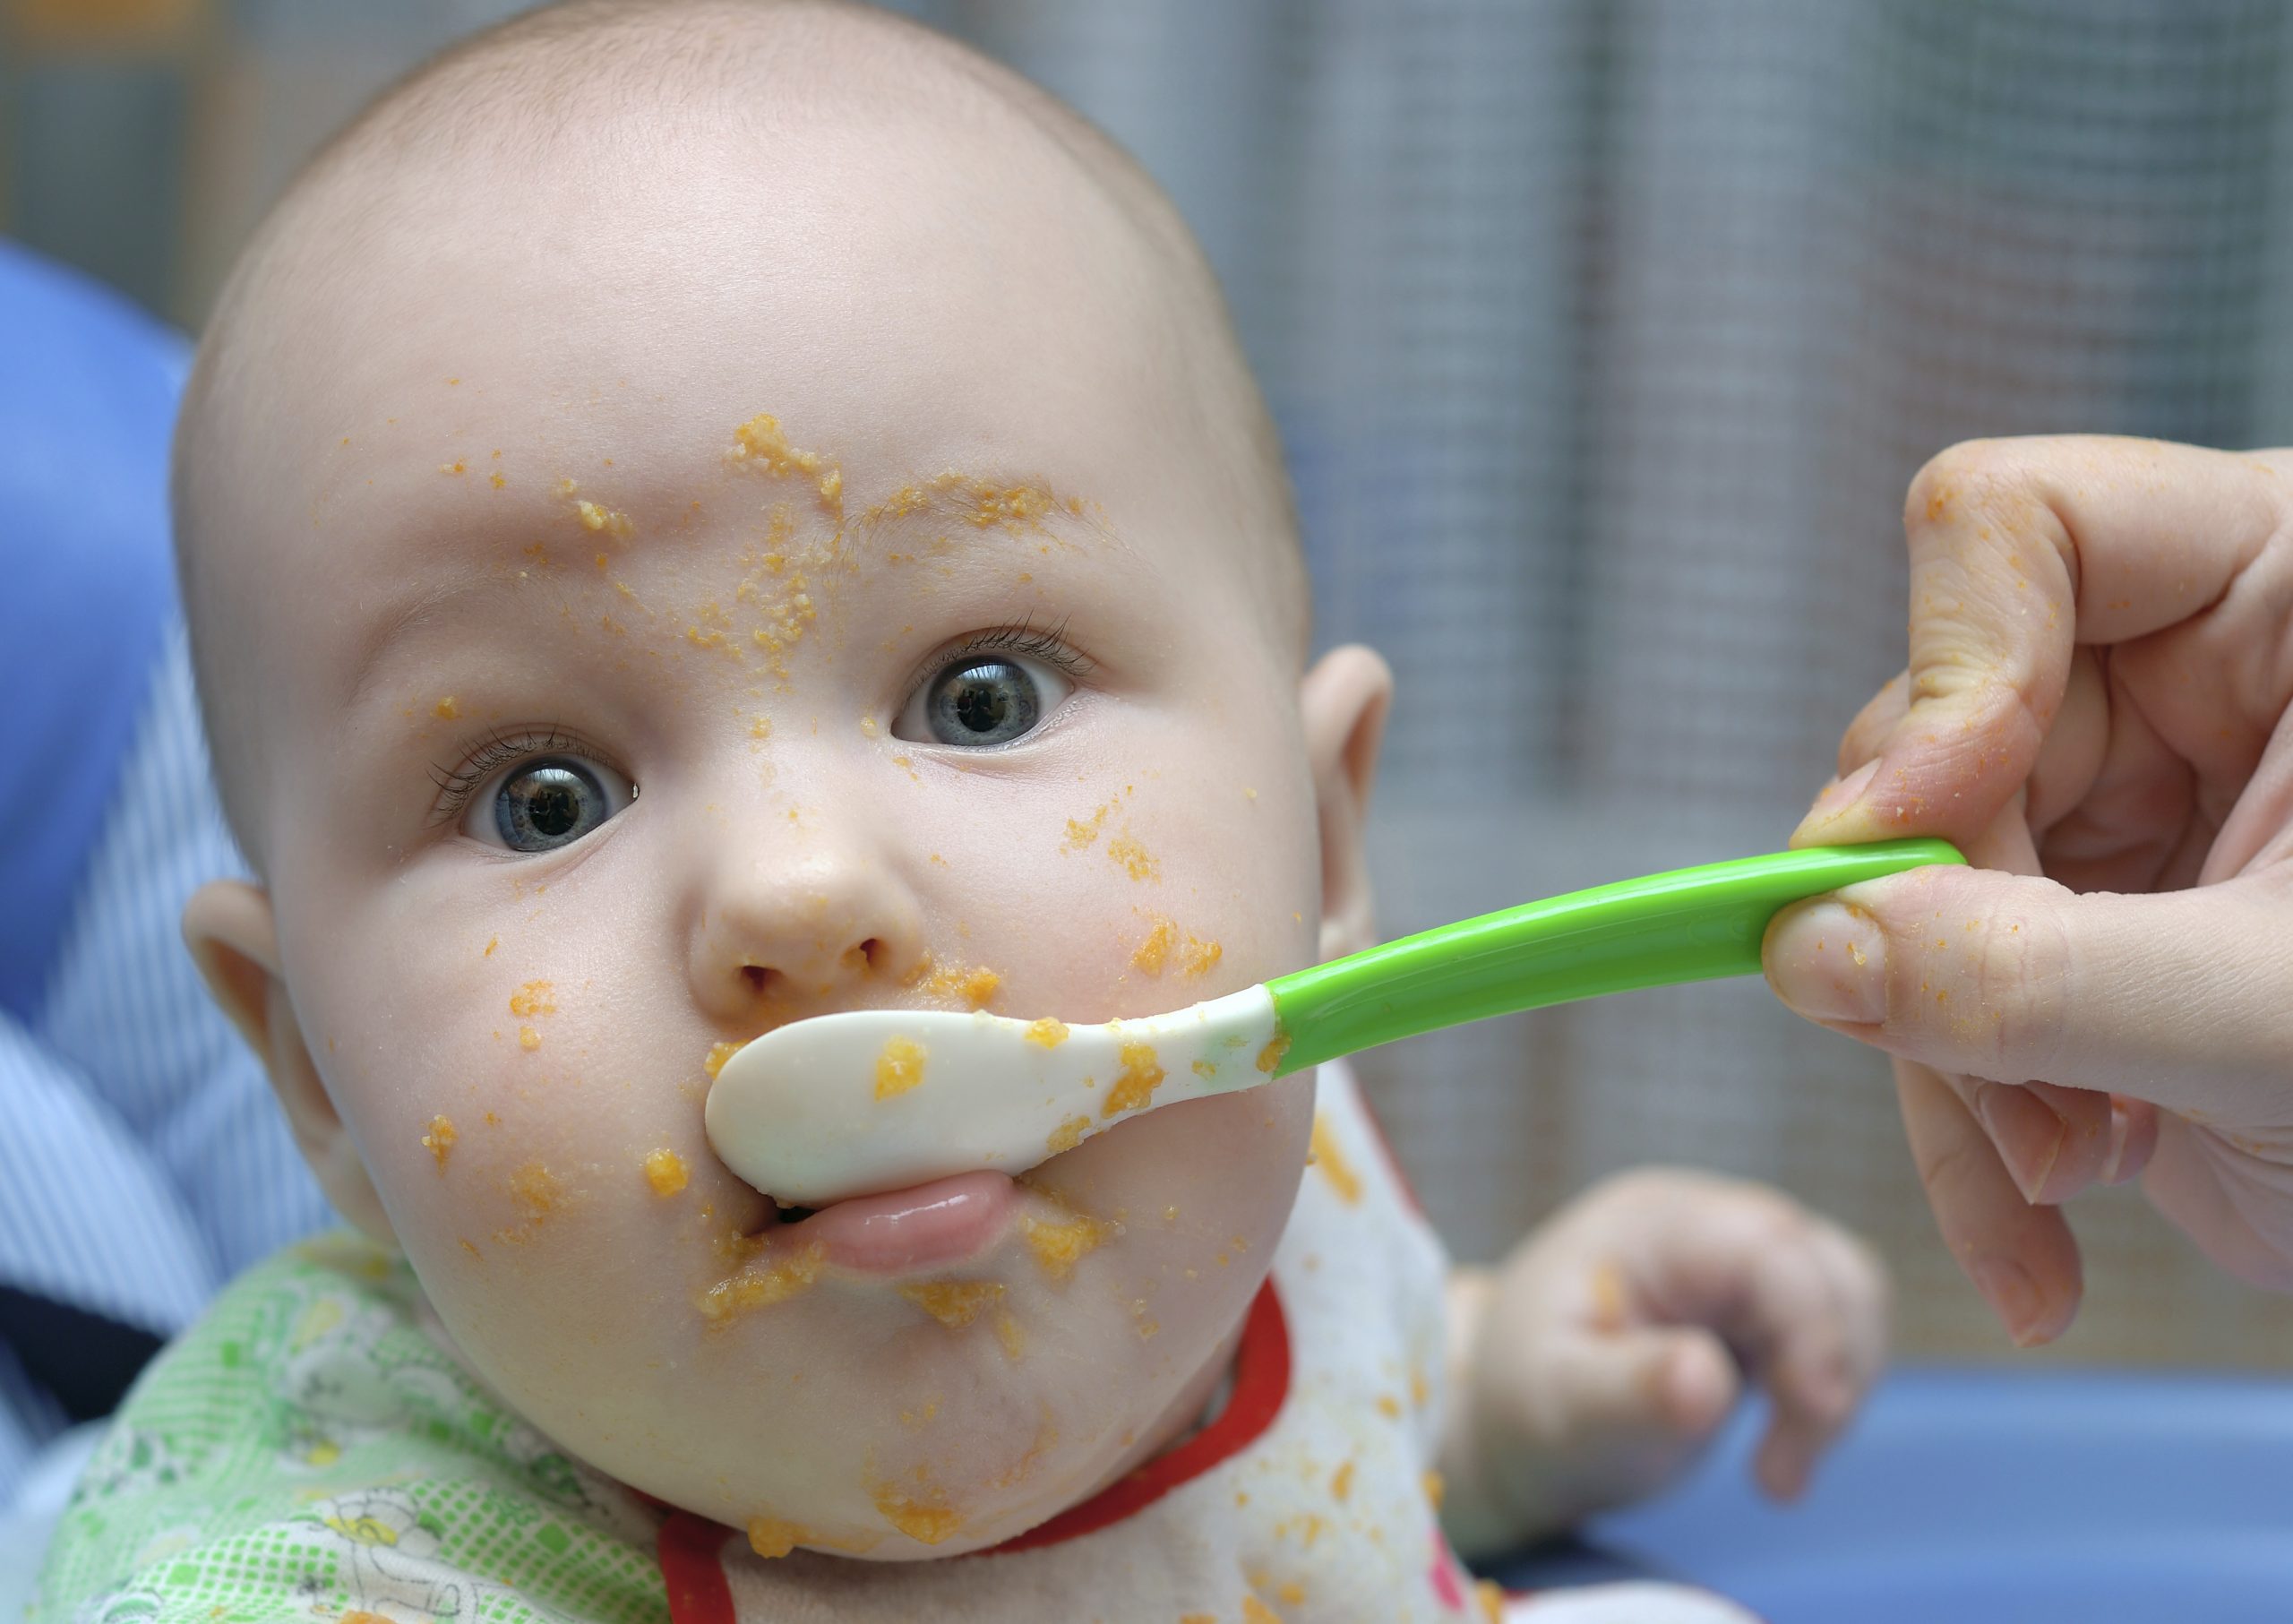 “Organic” Baby Food May Soon Contain Who-Knows-What